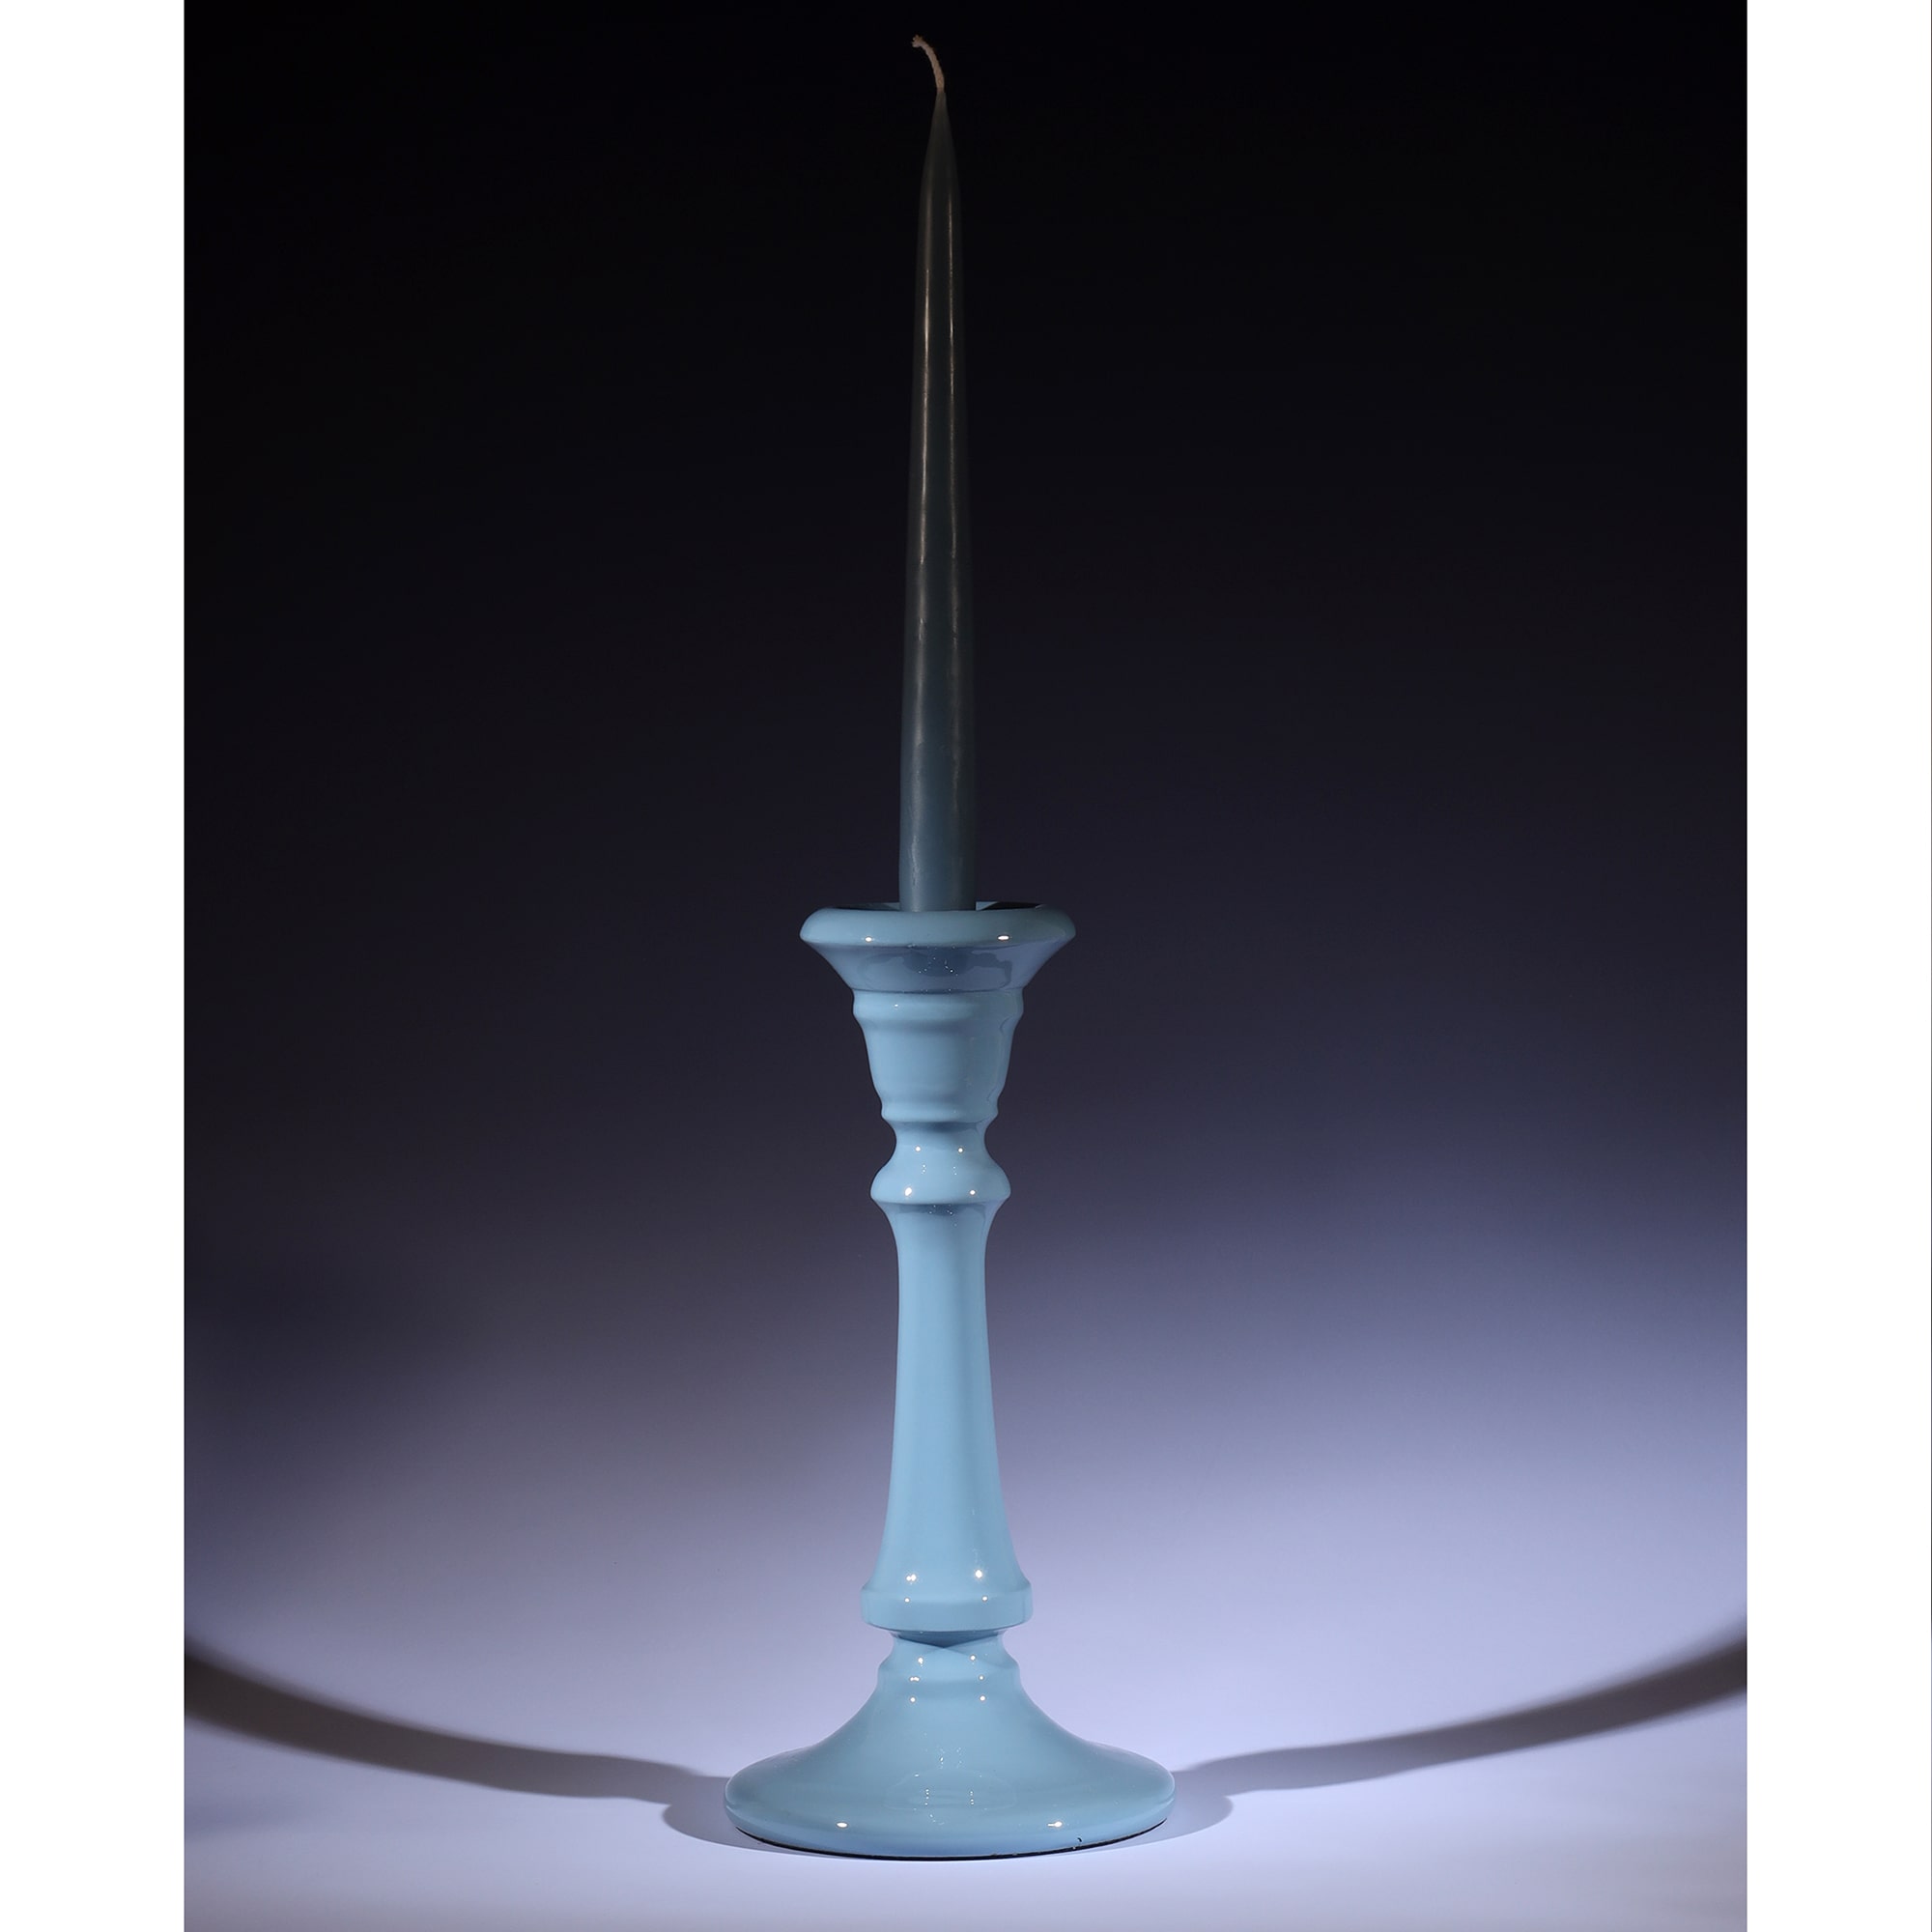 Powder Blue Polished Lacquer Tidal Candle holder with a matching candle